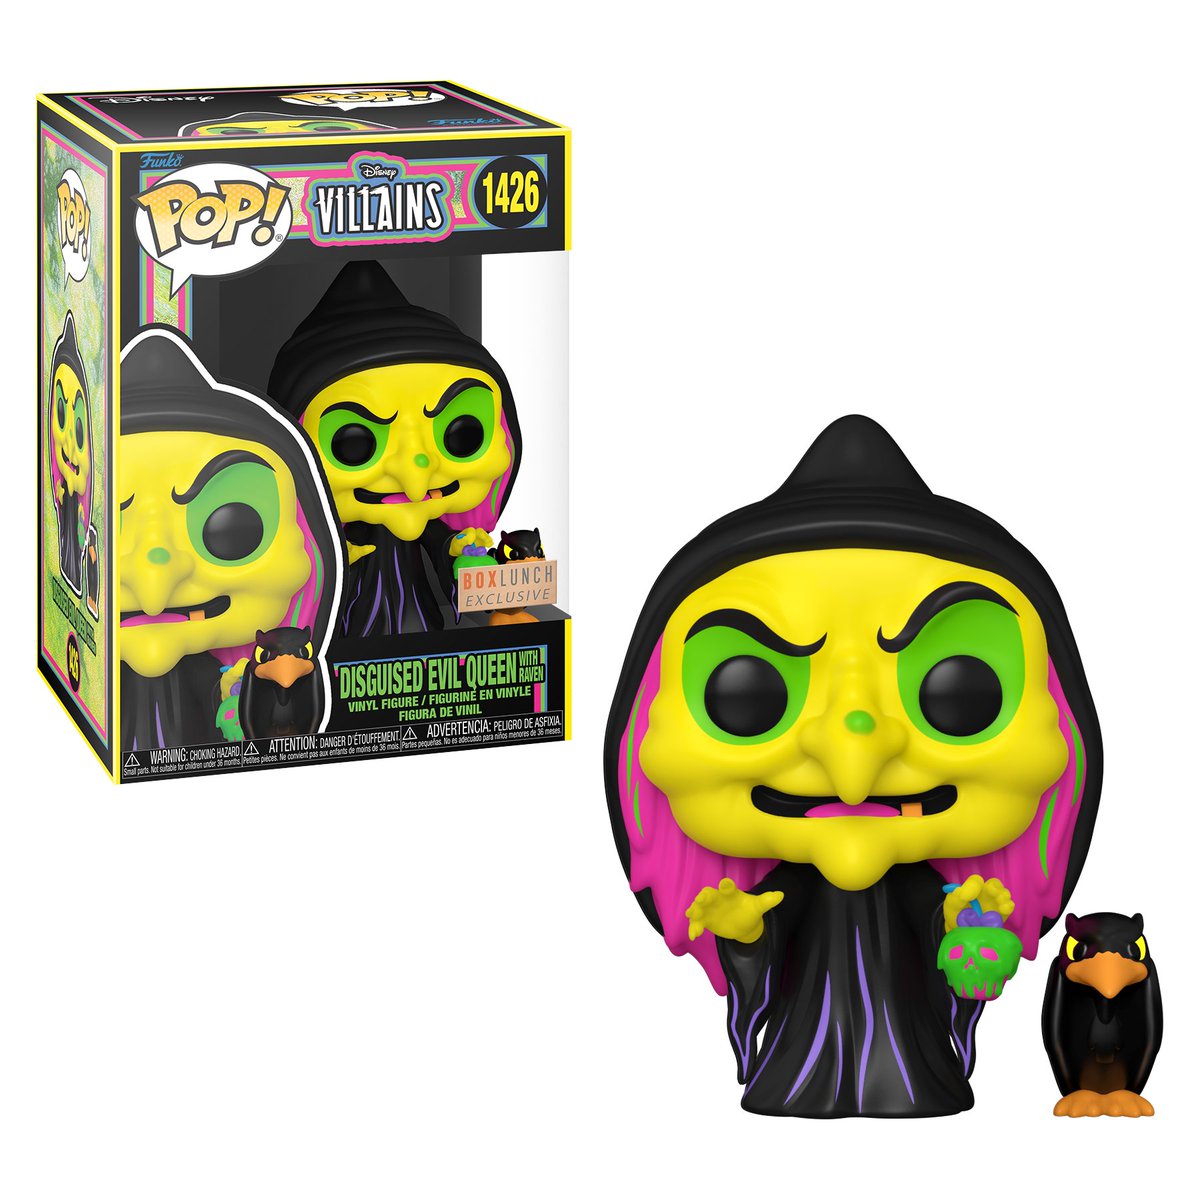 Available Now: BoxLunch Exclusive Disguised Evil Queen with Raven (Black Light) Funko Pop! Vinyl Link: finderz.info/3Wmsc3O #Ad #Disney #SnowWhite #Funko #FunkoPop #FunkoPops #FunkoPopVinyl #Pop #PopVinyl #FunkoCollector #Collectible #Collectibles #Toy #Toys #FunkoFinderz